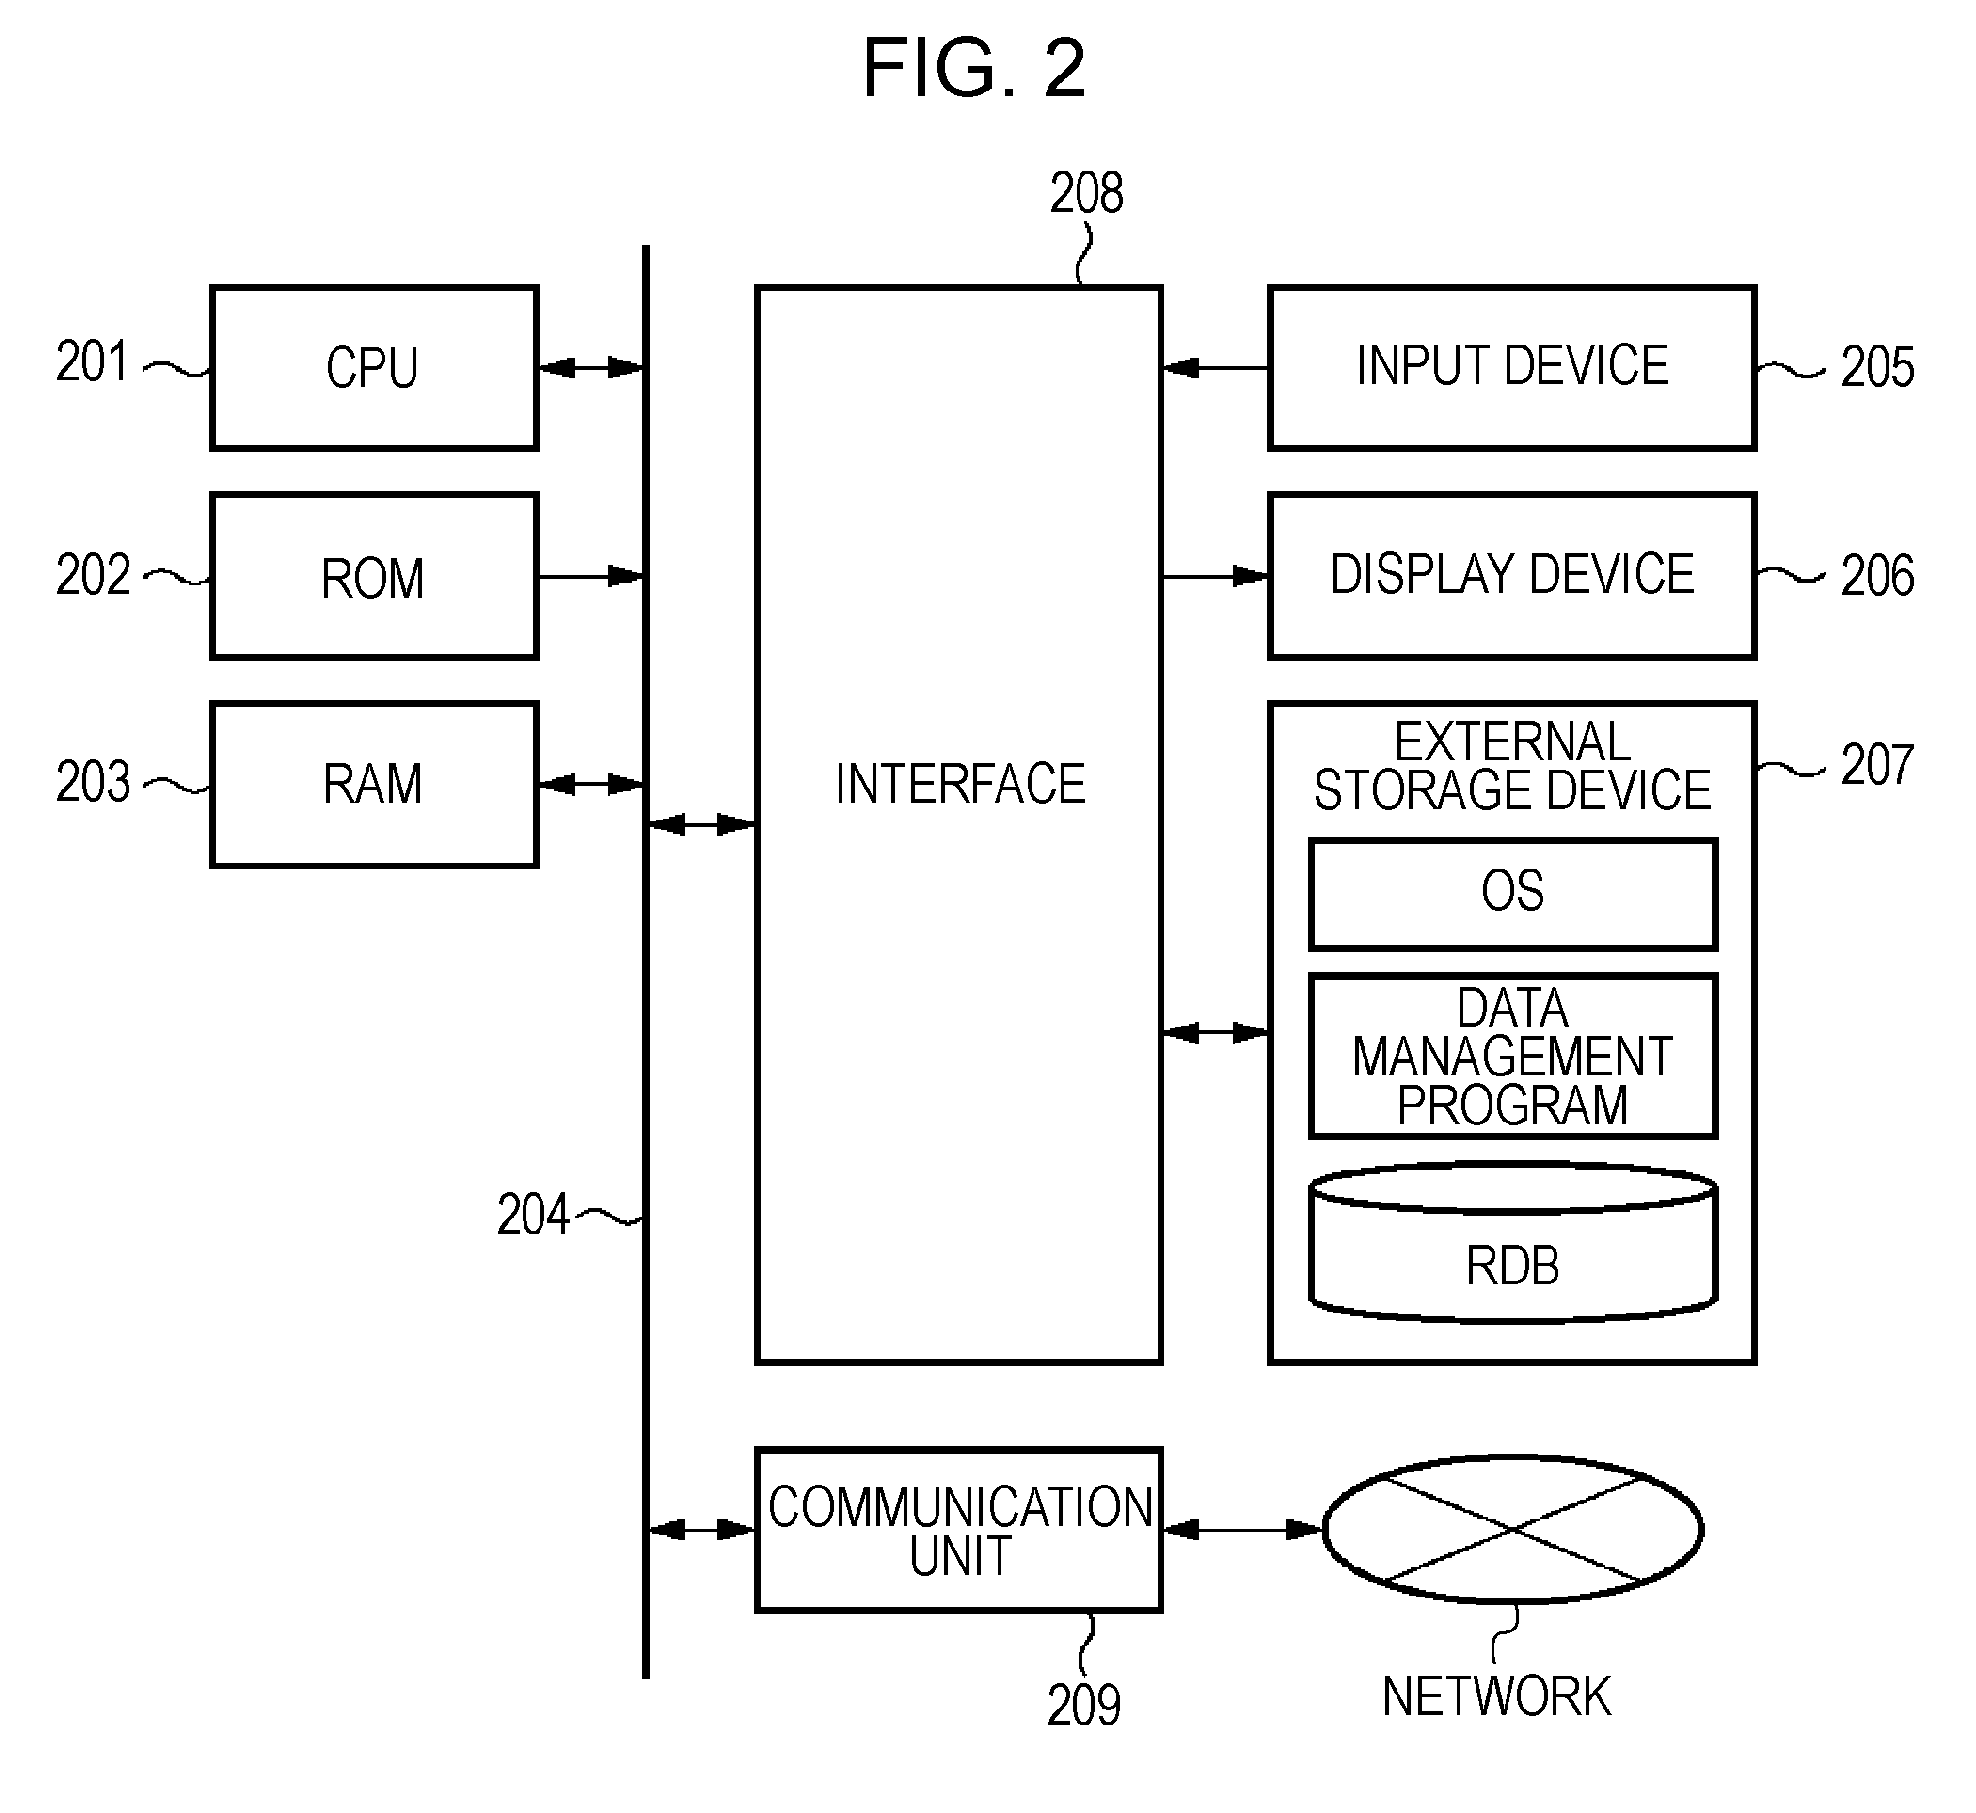 Data management apparatus and method for managing data elements using a plurality of metadata elements